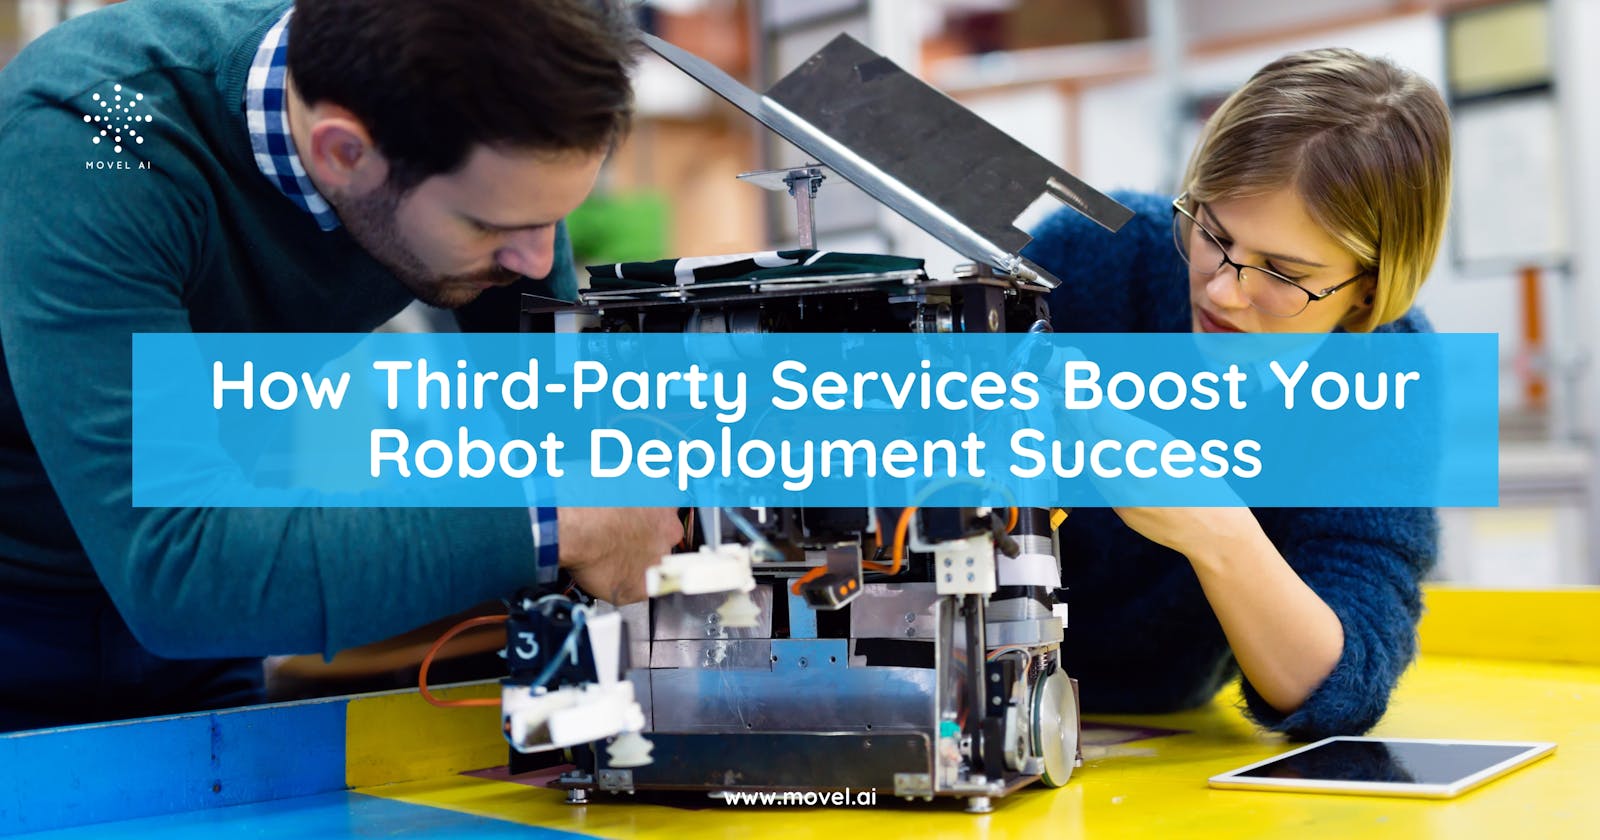 How Third-Party Services Boost Your Mobile Robot Deployment Success